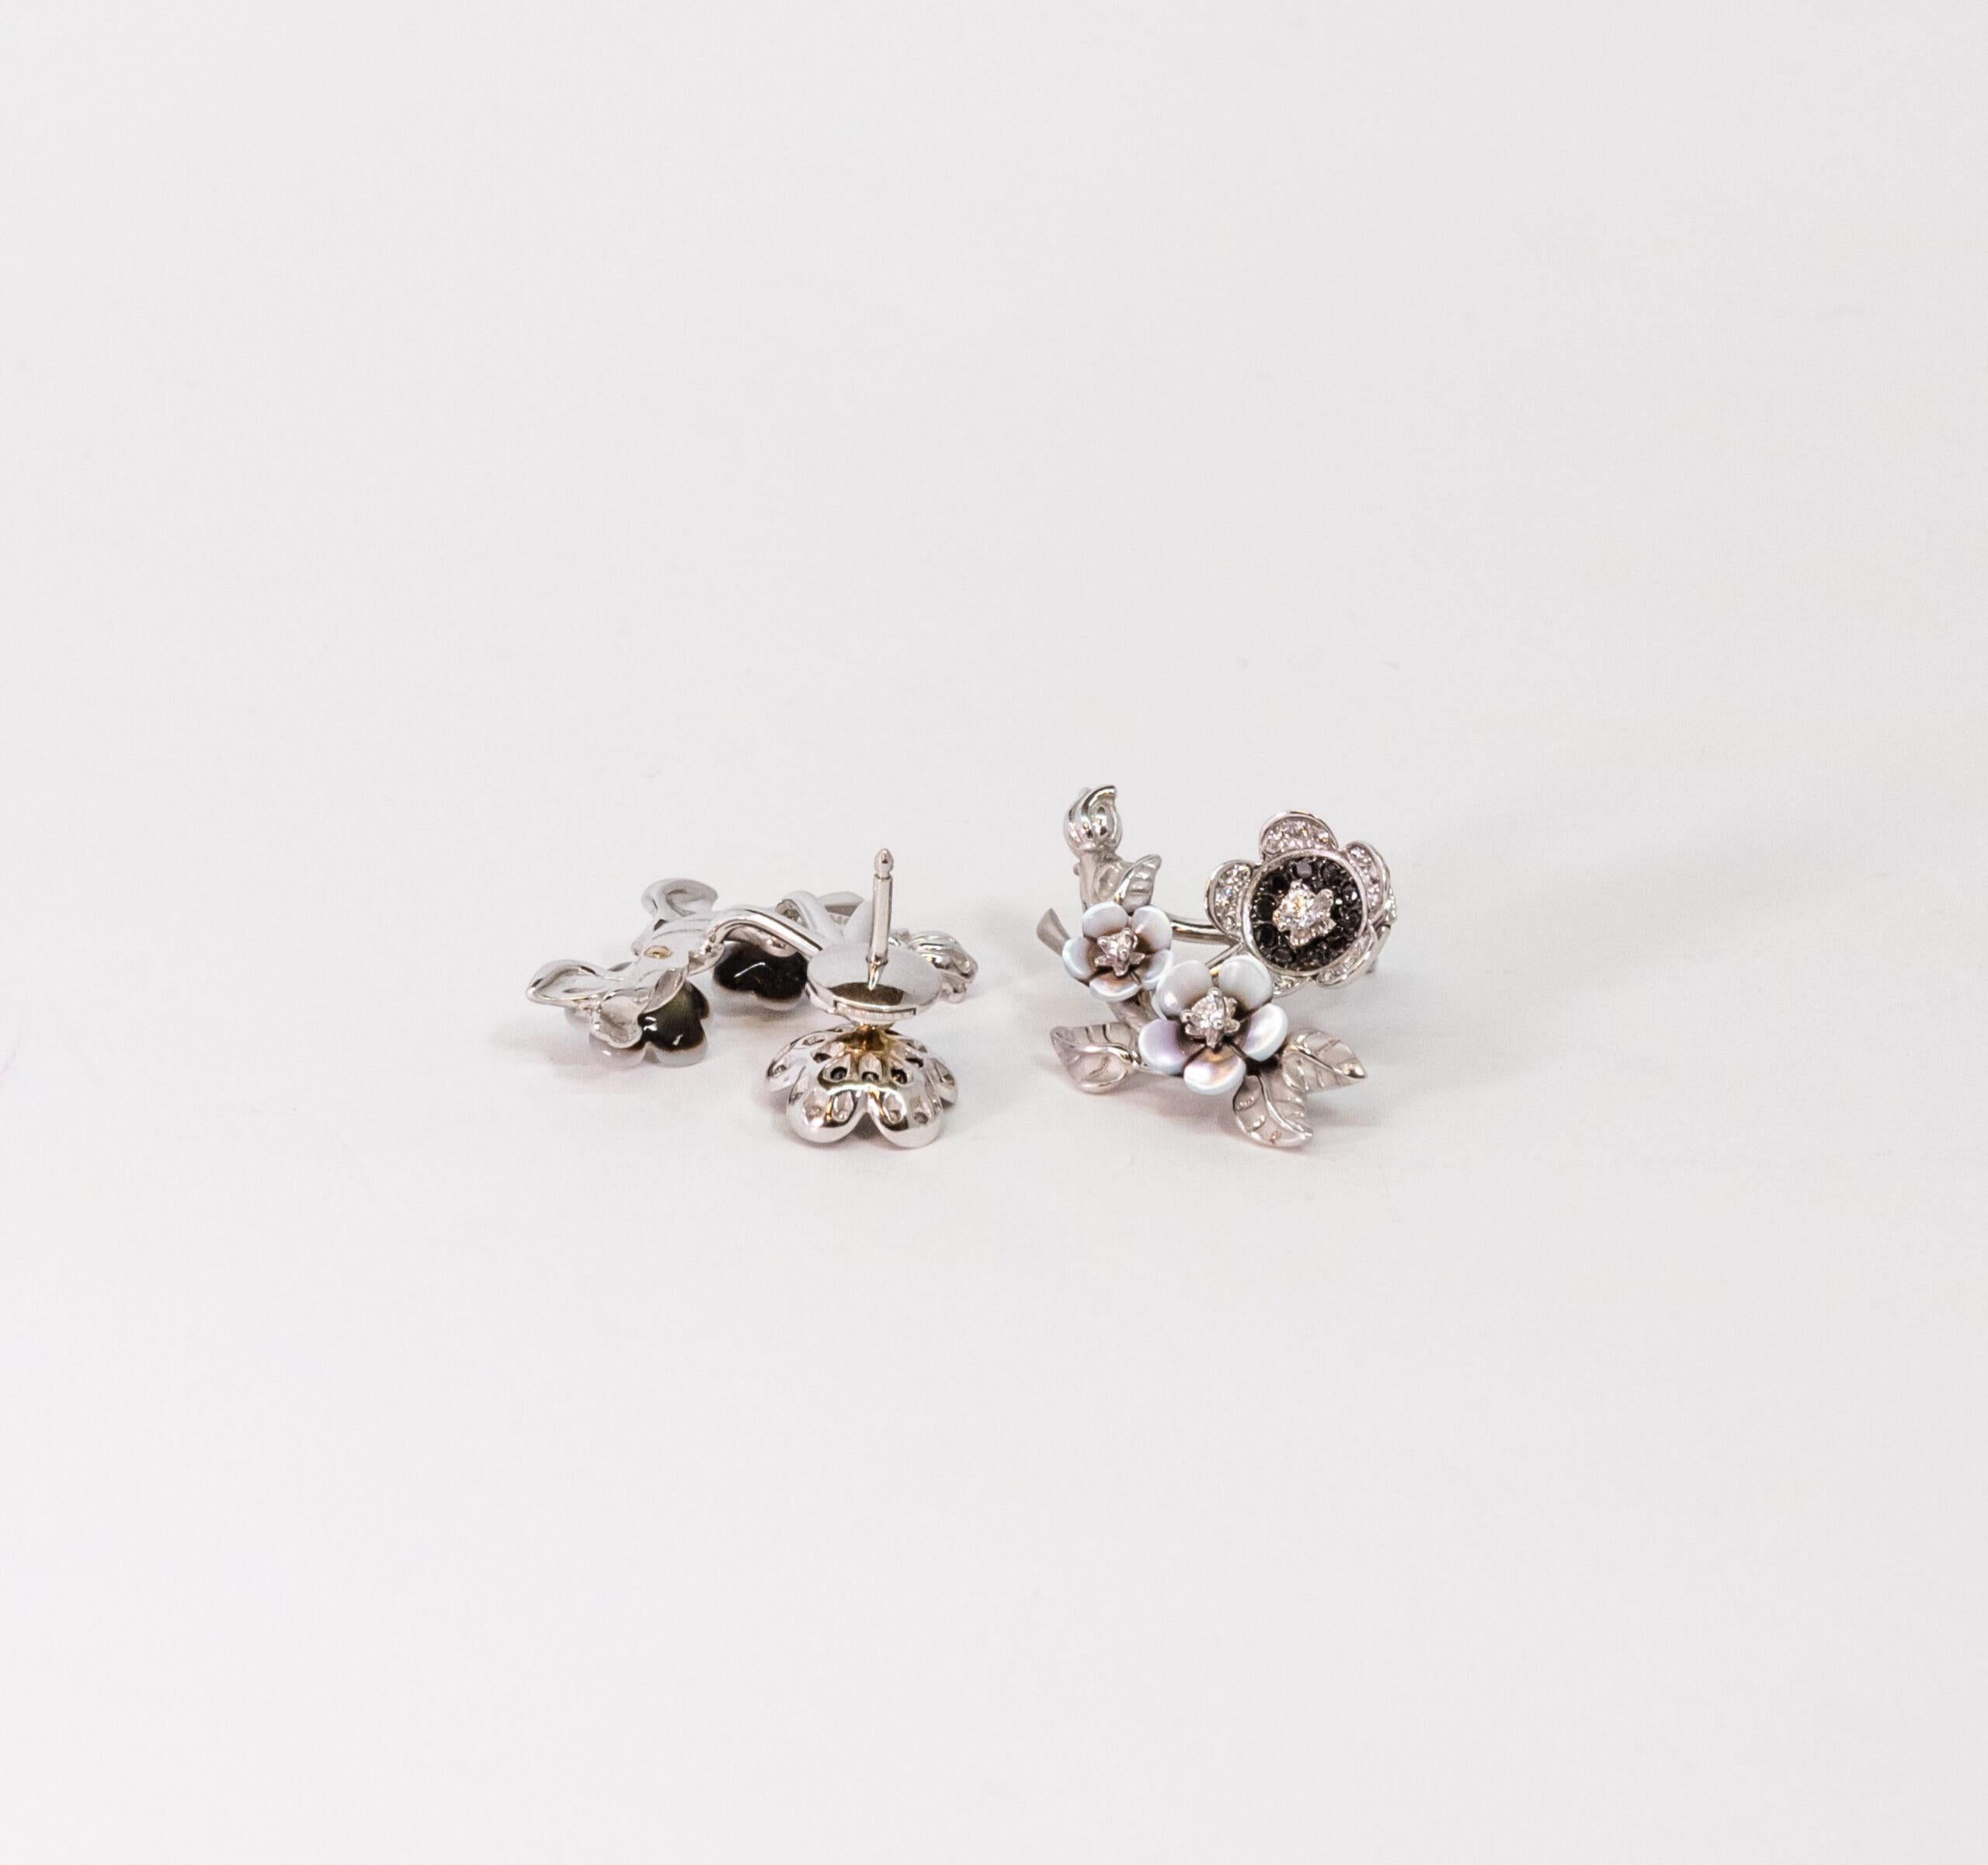 10070437 Carrera y Carrera
This 18K White Gold stud earring is made as spring of flowers. Two Mother of Pearl flowers set with 2 diamonds. Third flower figure set with 16 White diamonds and 10 Black Diamonds. All Diamonds are totaling ~0.56ct. Push